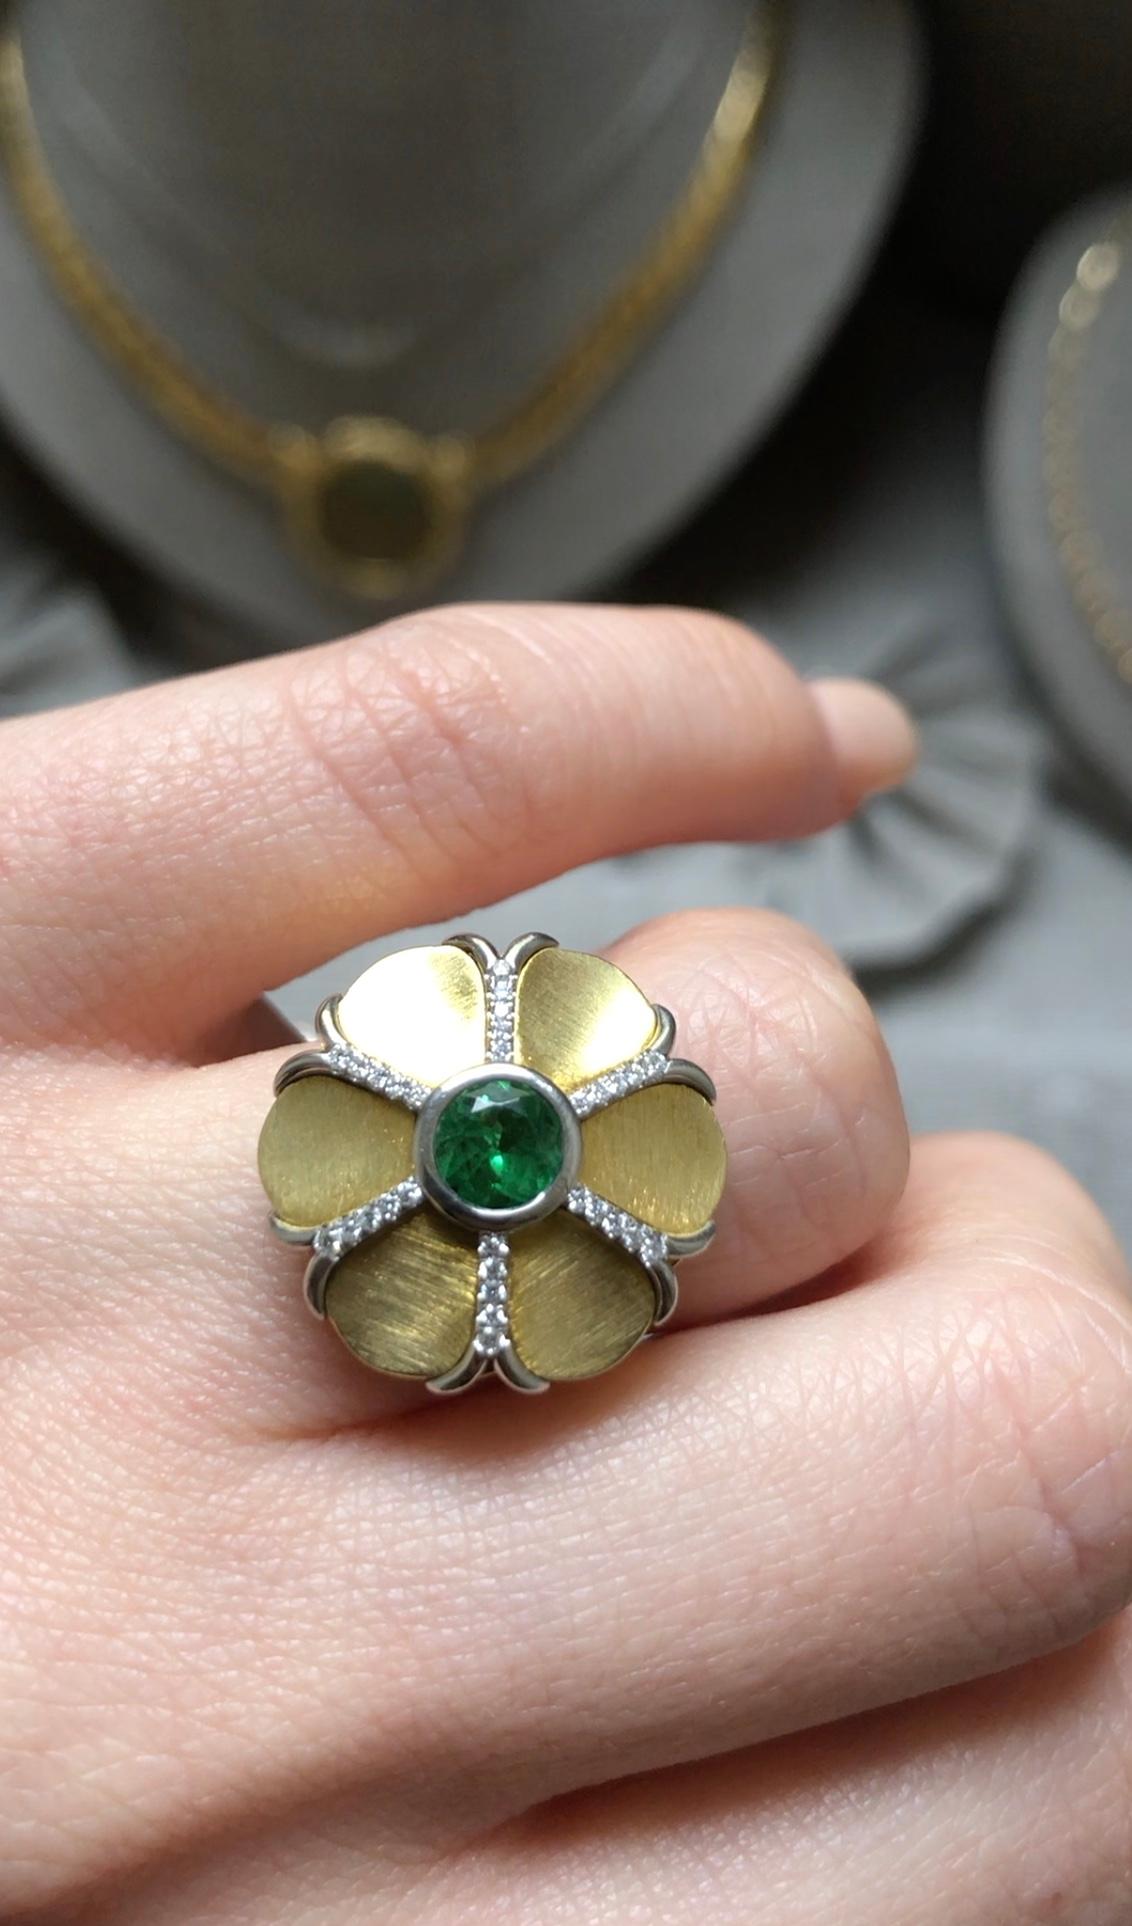 For Sale:  18k Yellow Gold and Platinum Diamond Cocktail Ring with 0.80 Carat Green Garnet 9